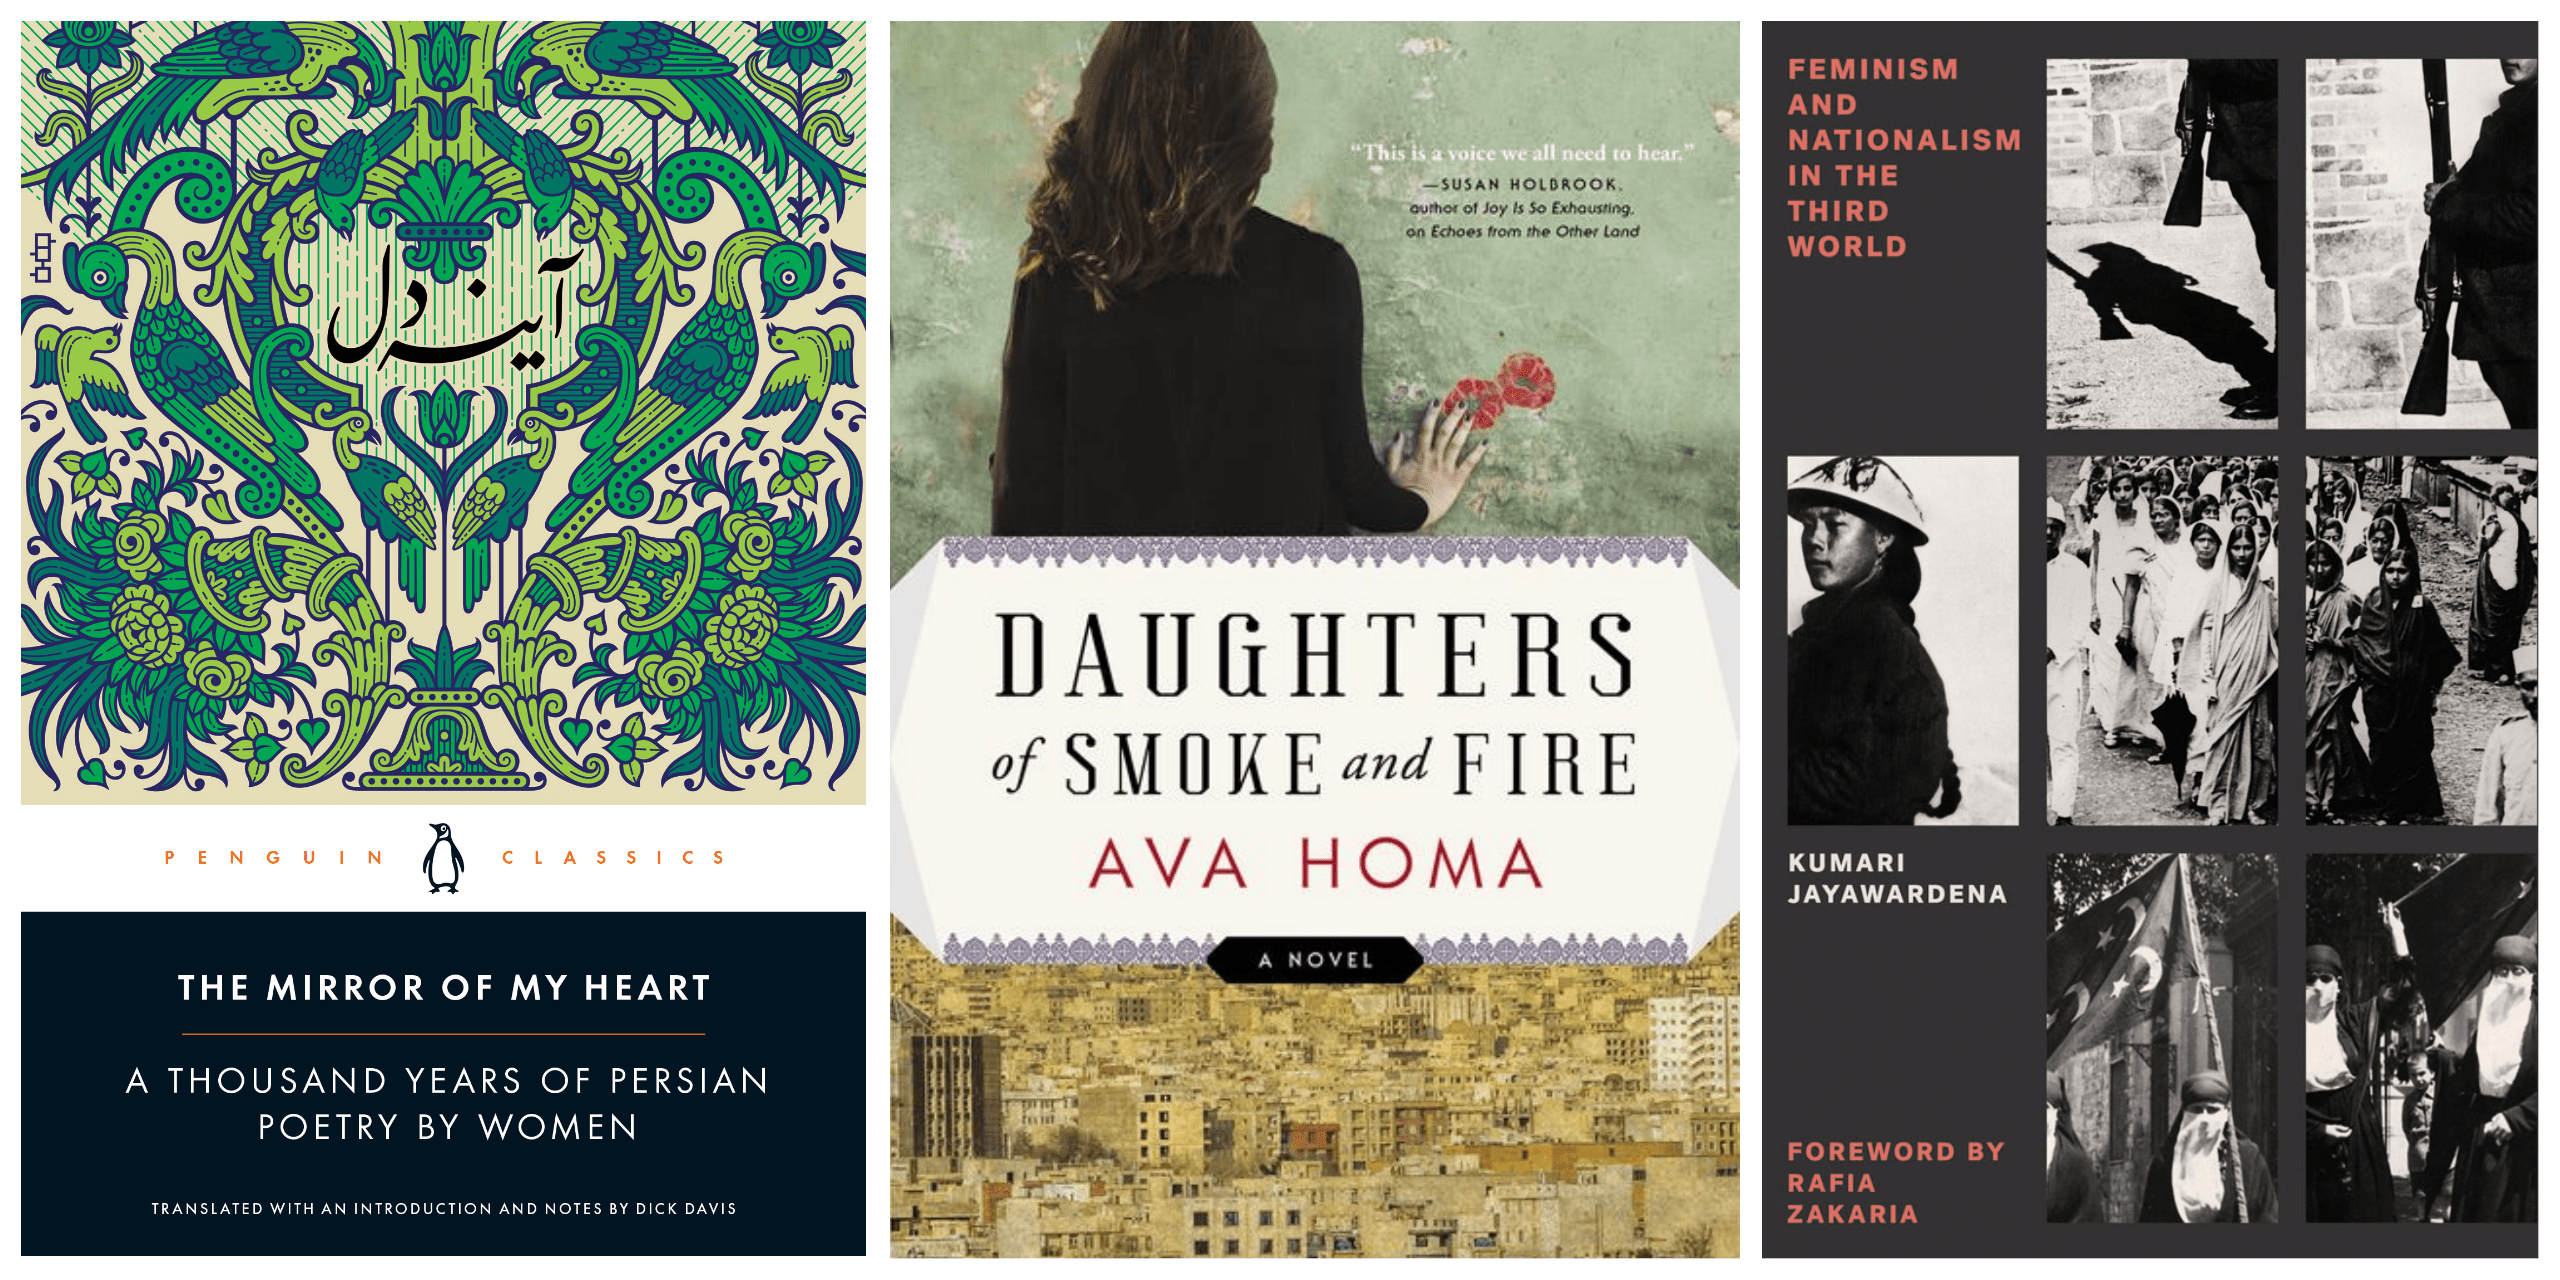 WBUR arts and culture fellow Lauren Williams recommends three books by Iranian women and on global feminism. (Courtesy of the book publishers)